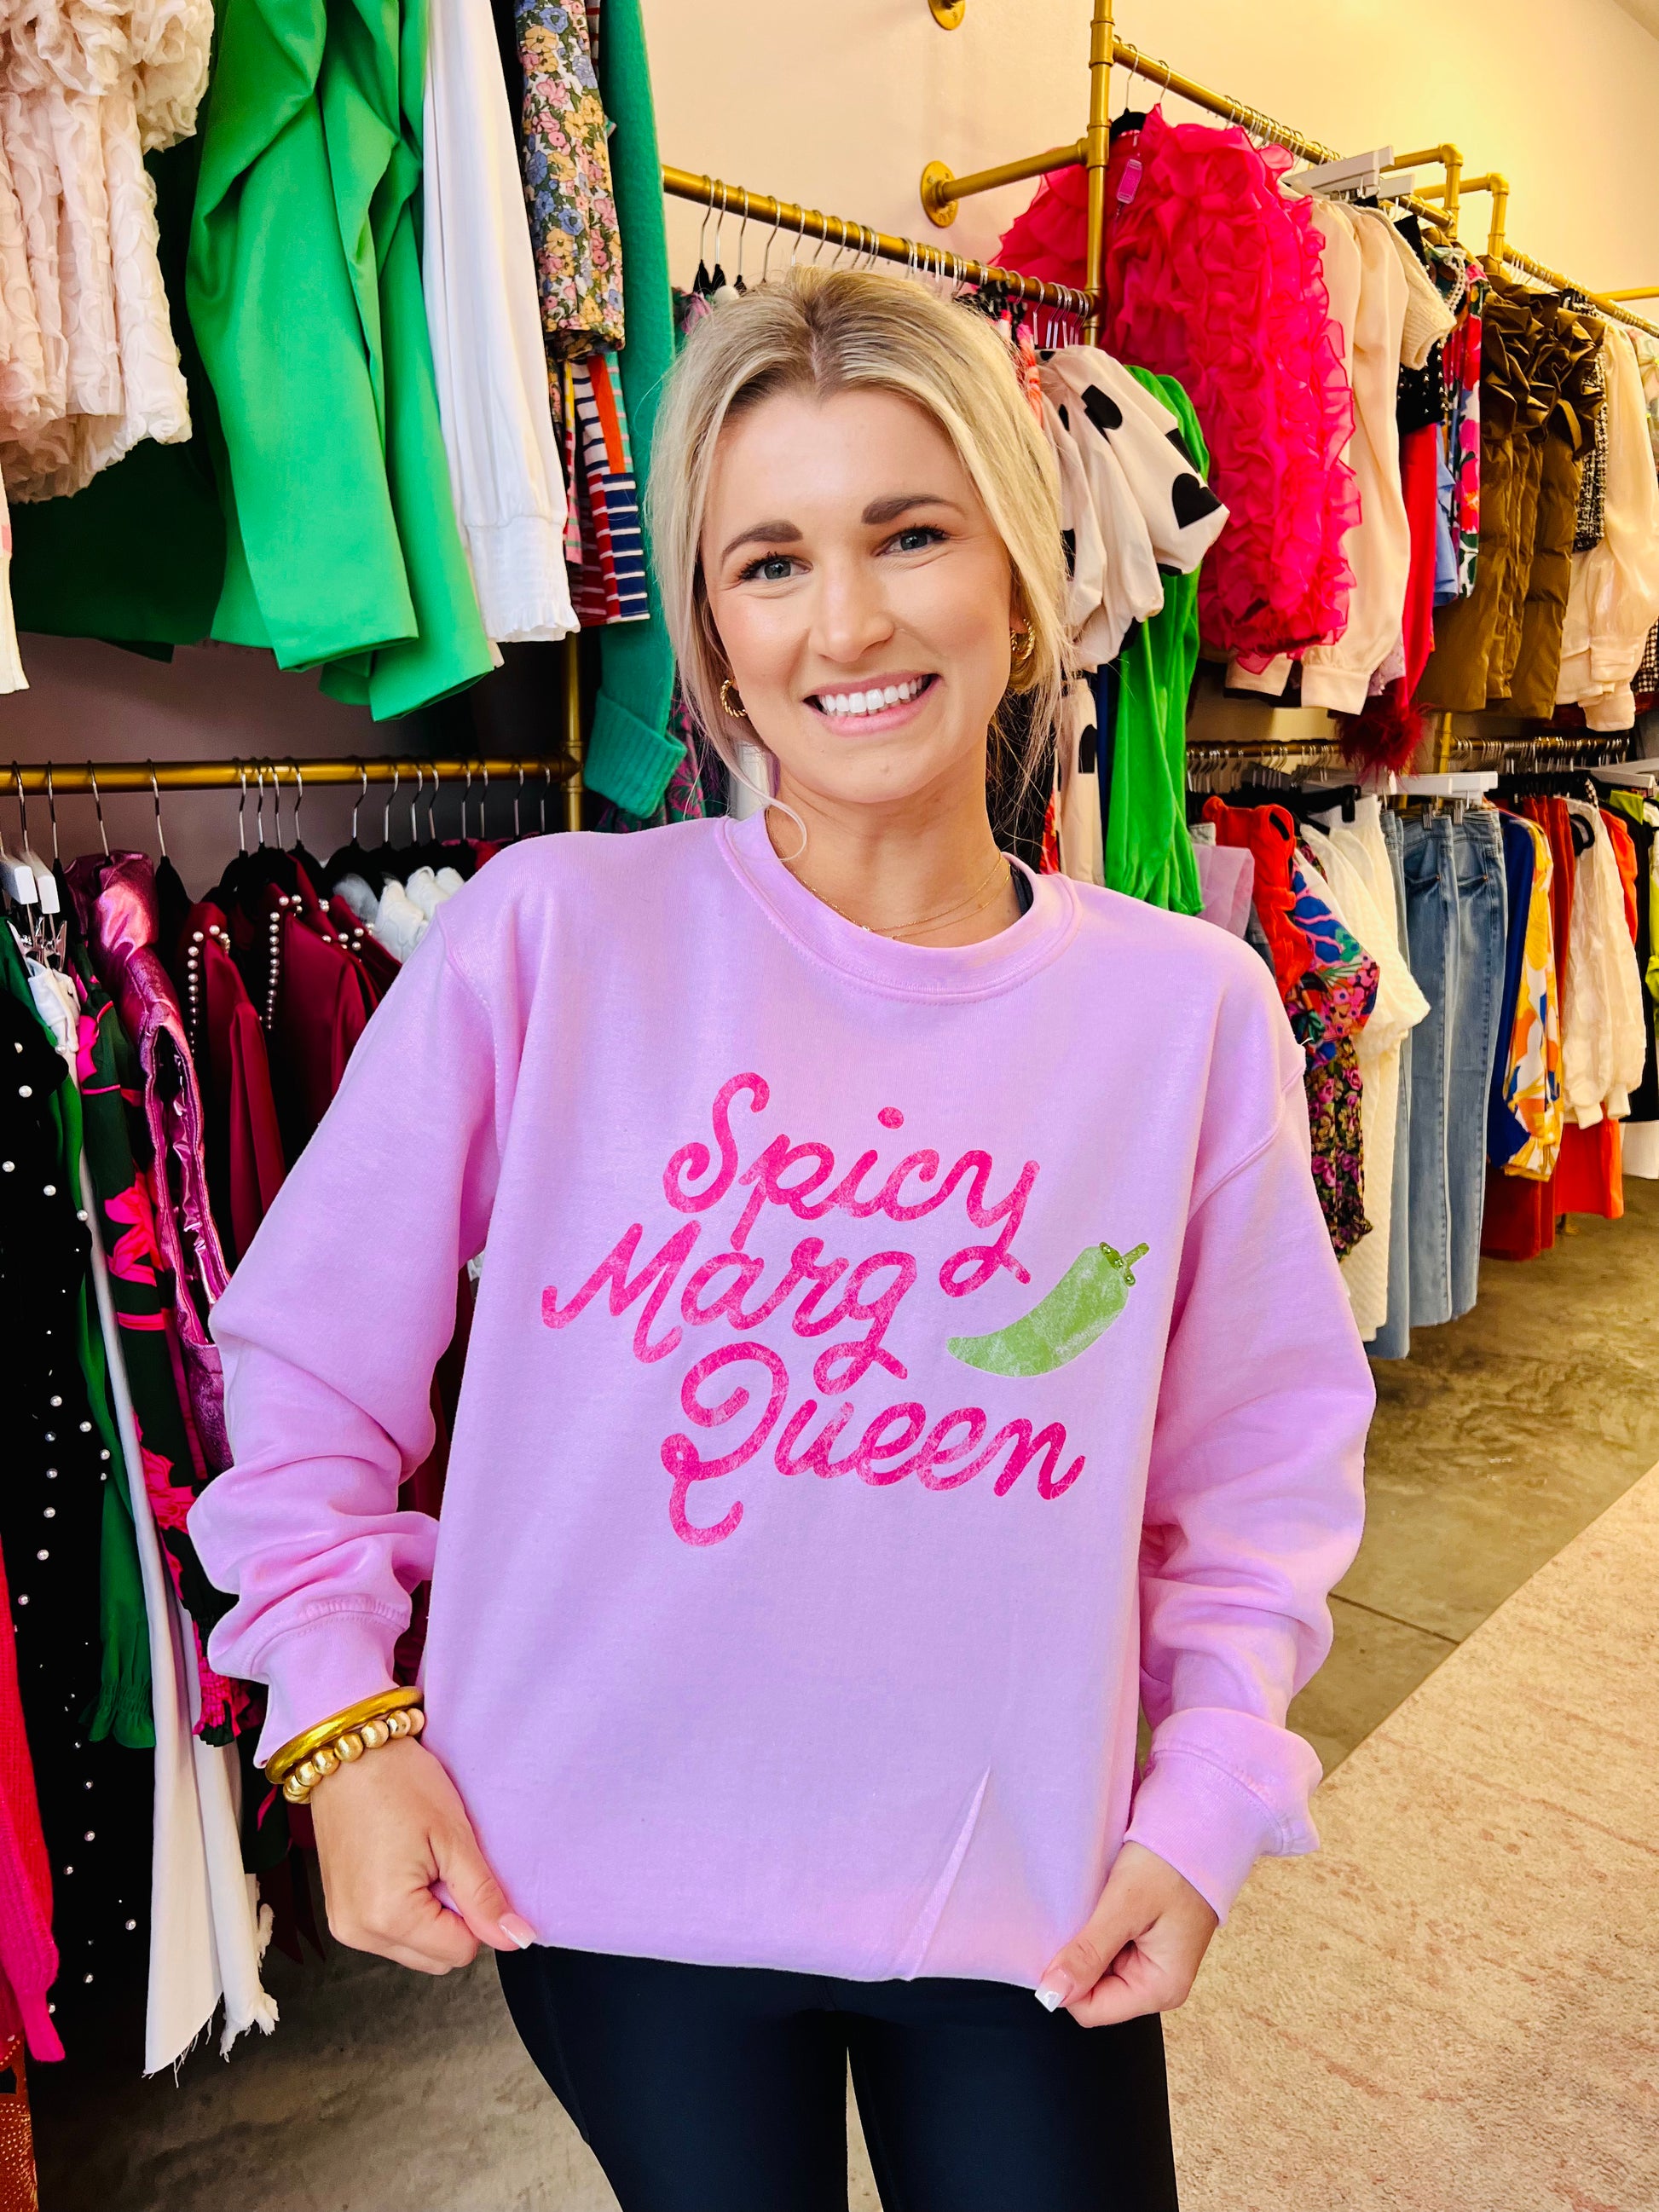 Be the queen of the cool kids with our Spicy Marg Queen sweater. This stylish sweatshirt will add some spice to your wardrobe and have you feeling like royalty. Perfect for casual GNO!